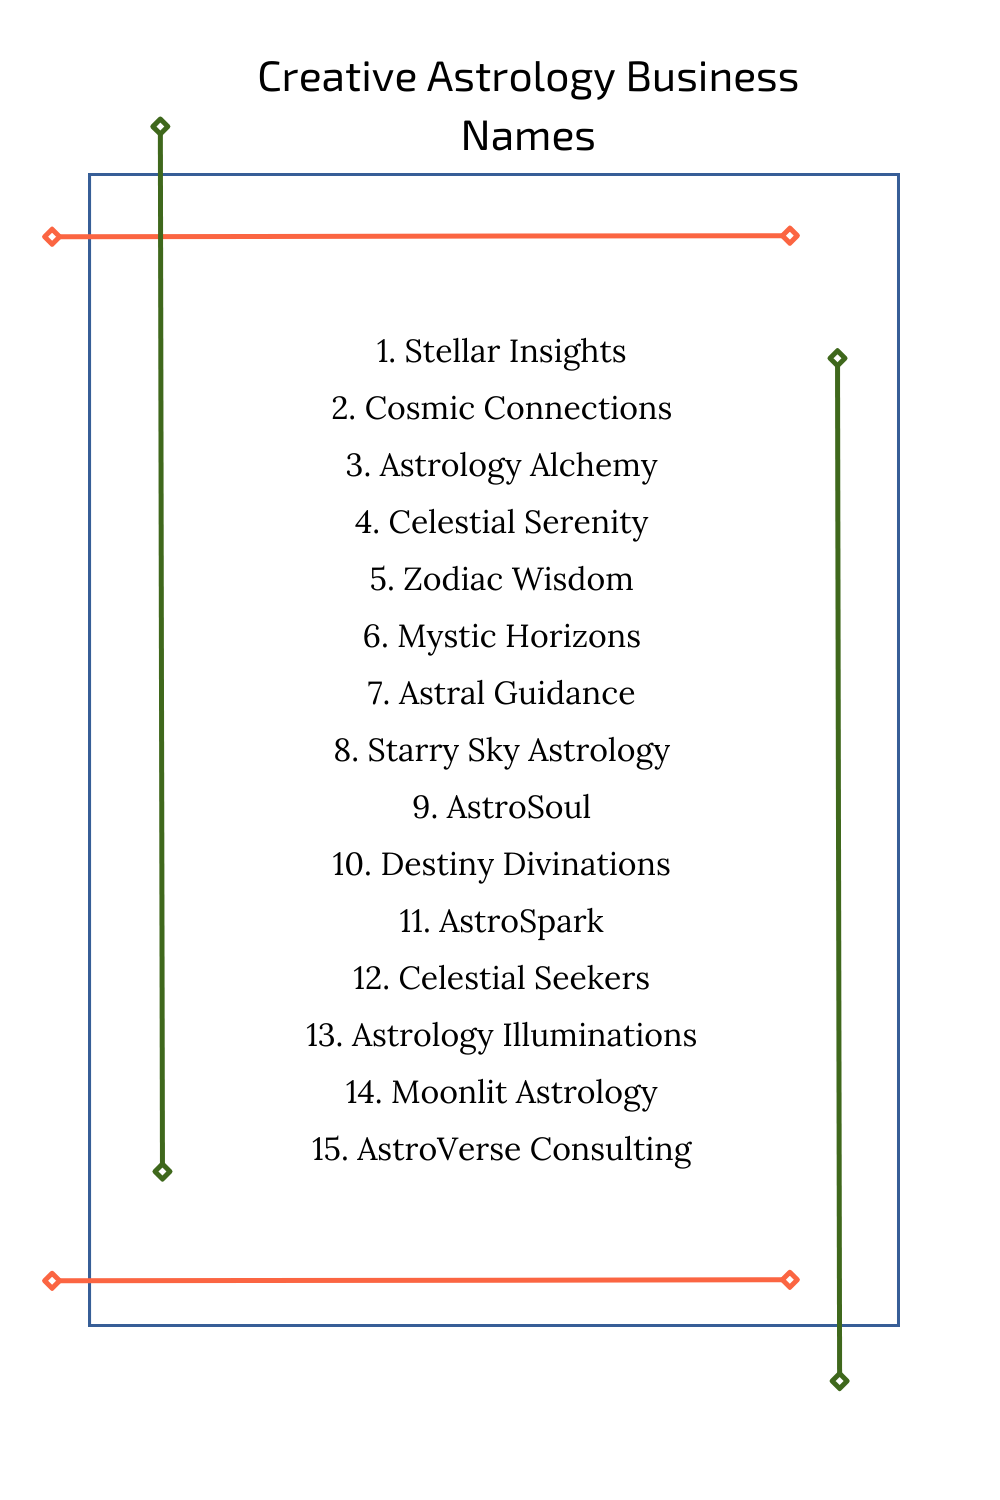 Creative Astrology Business Names